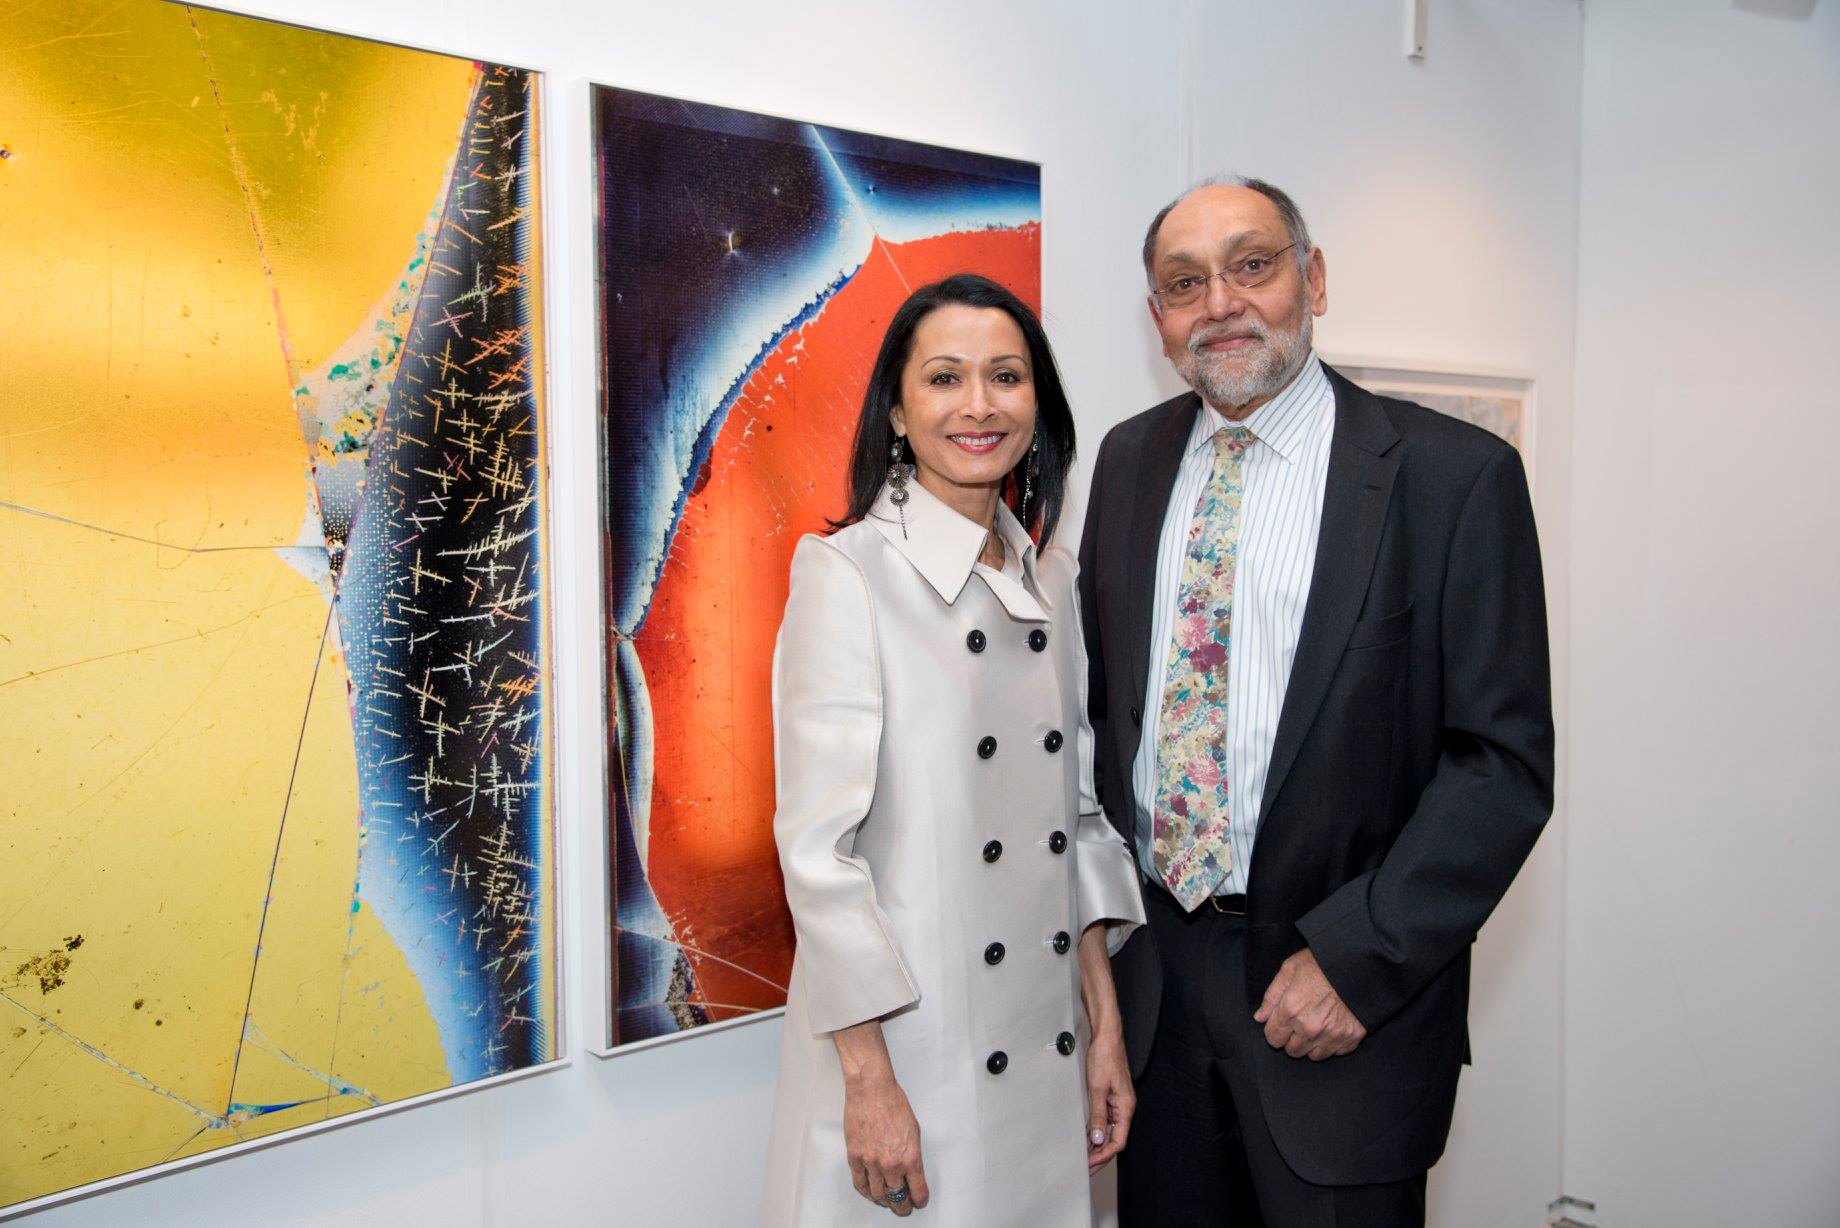 Anita and Prabha Sinha stand in front of an abstract canvas